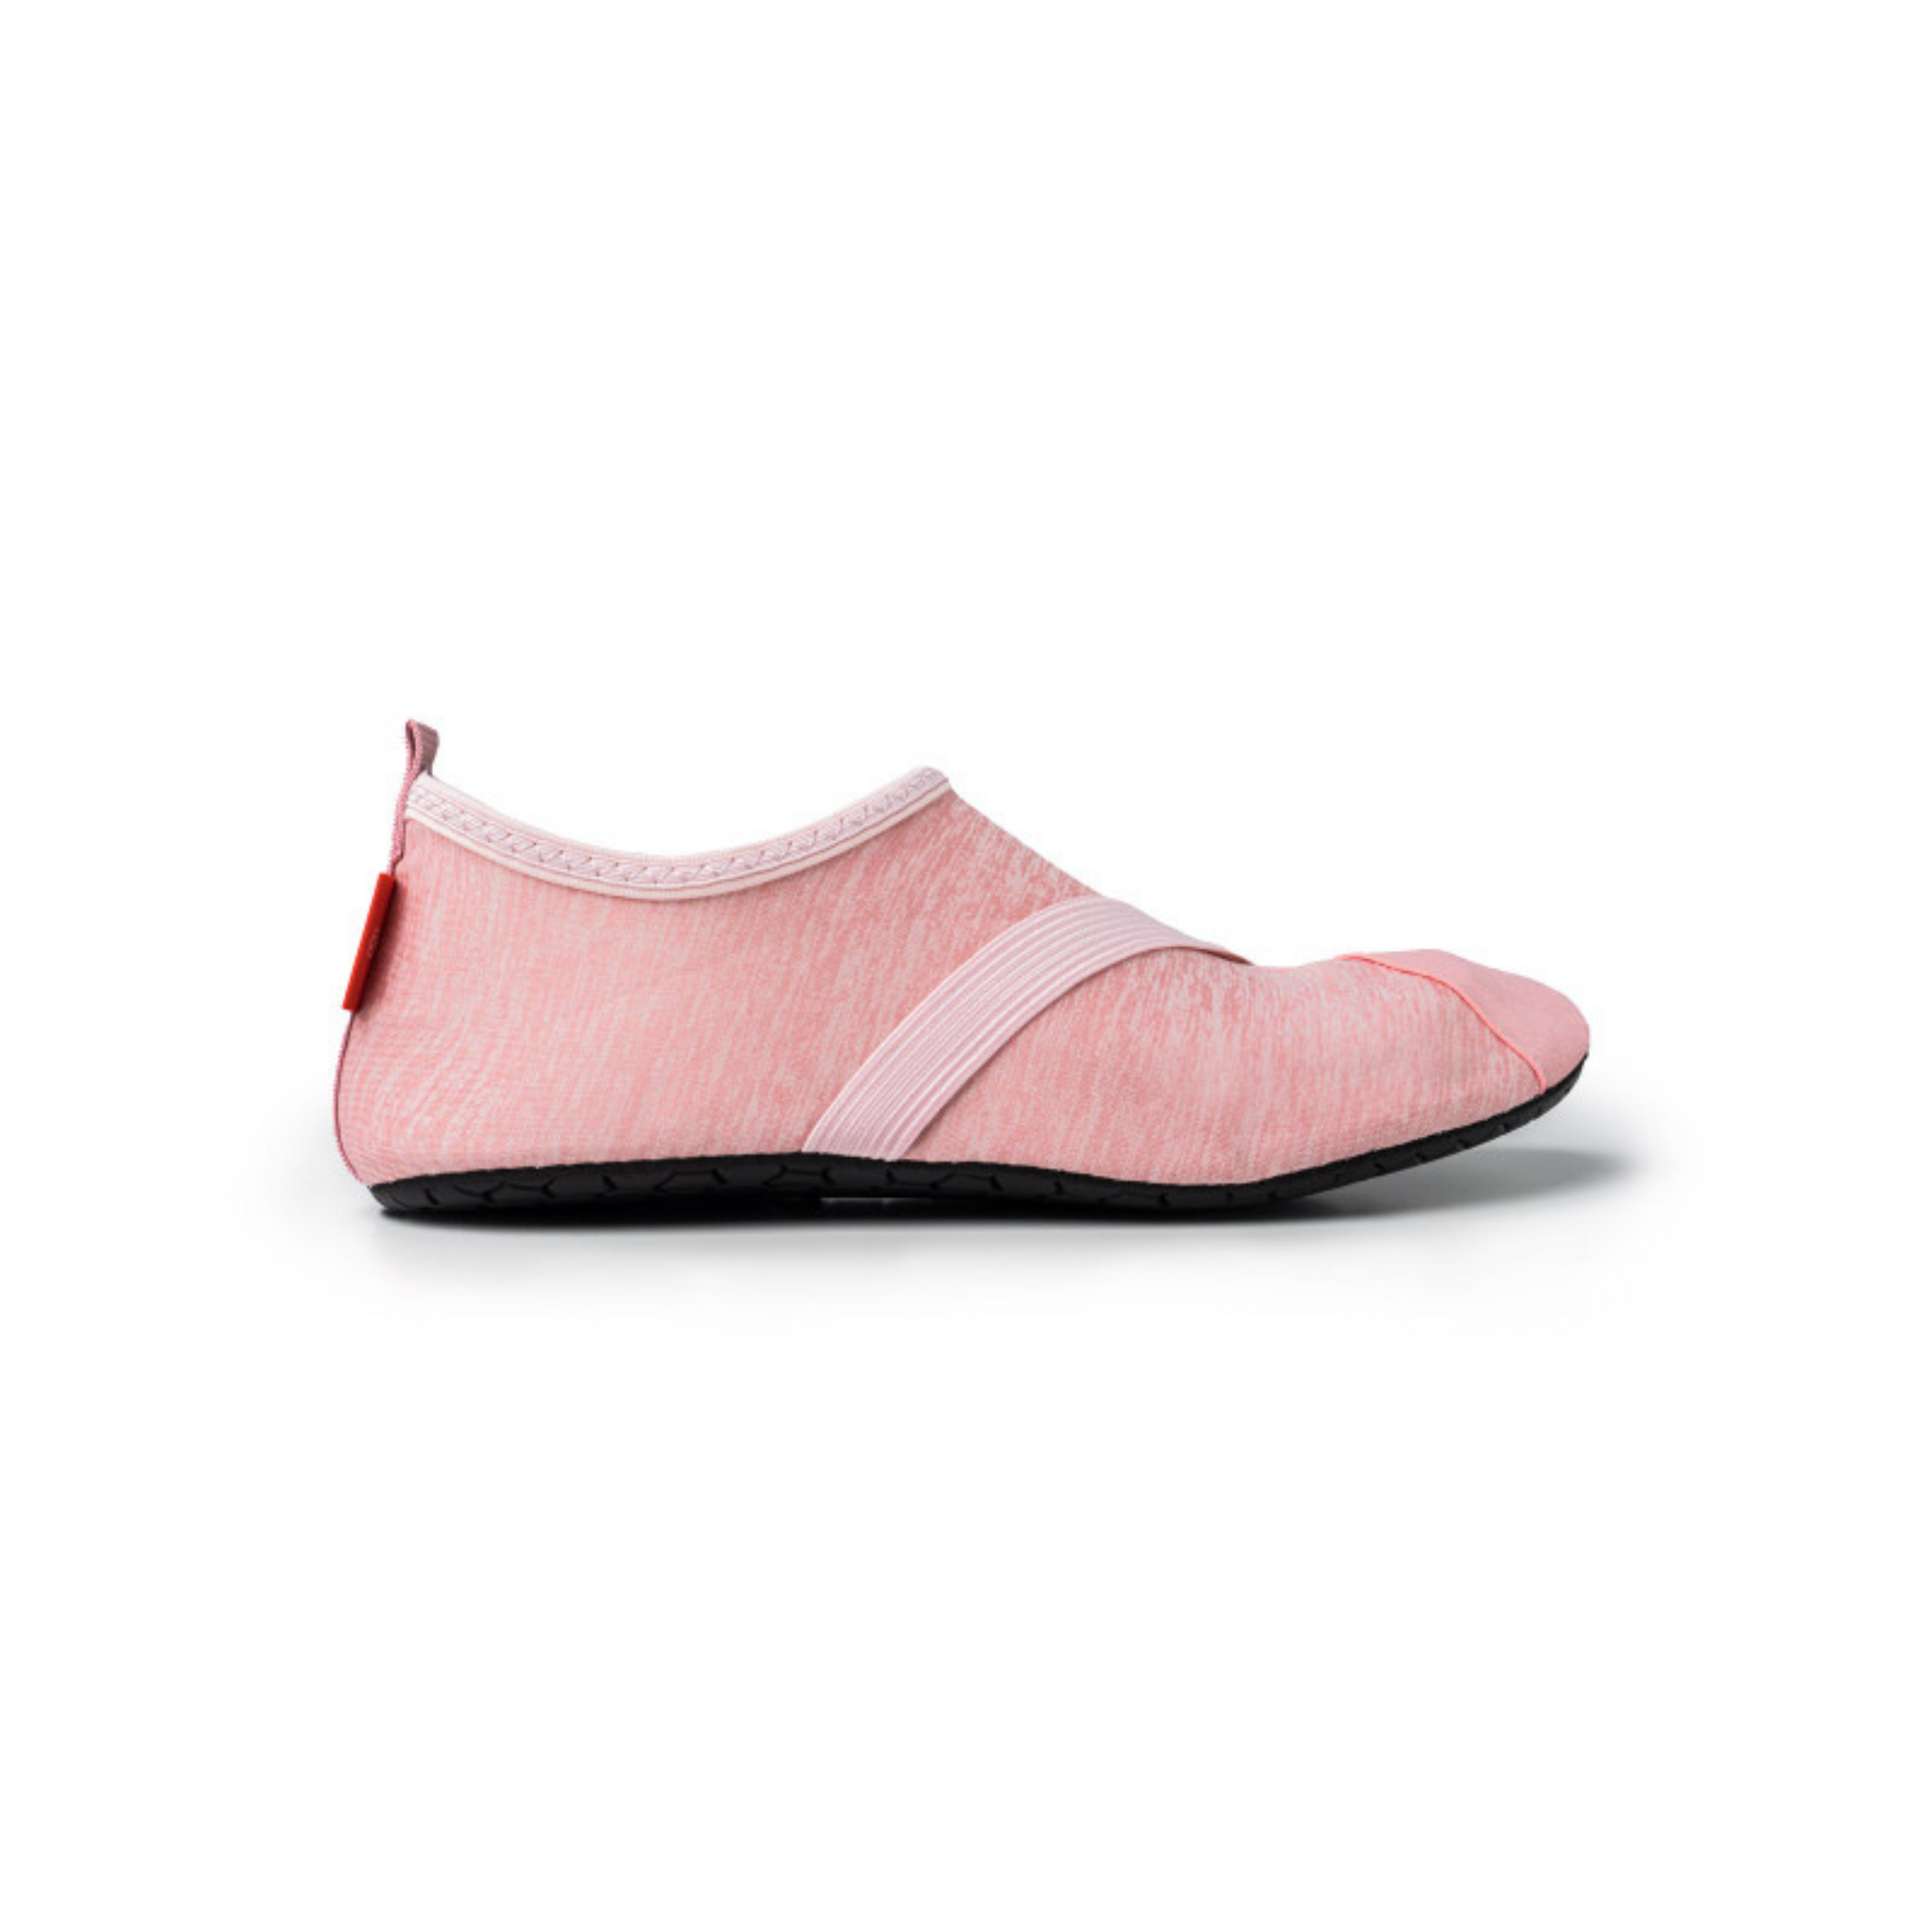 Heather pink fitkick active footwear